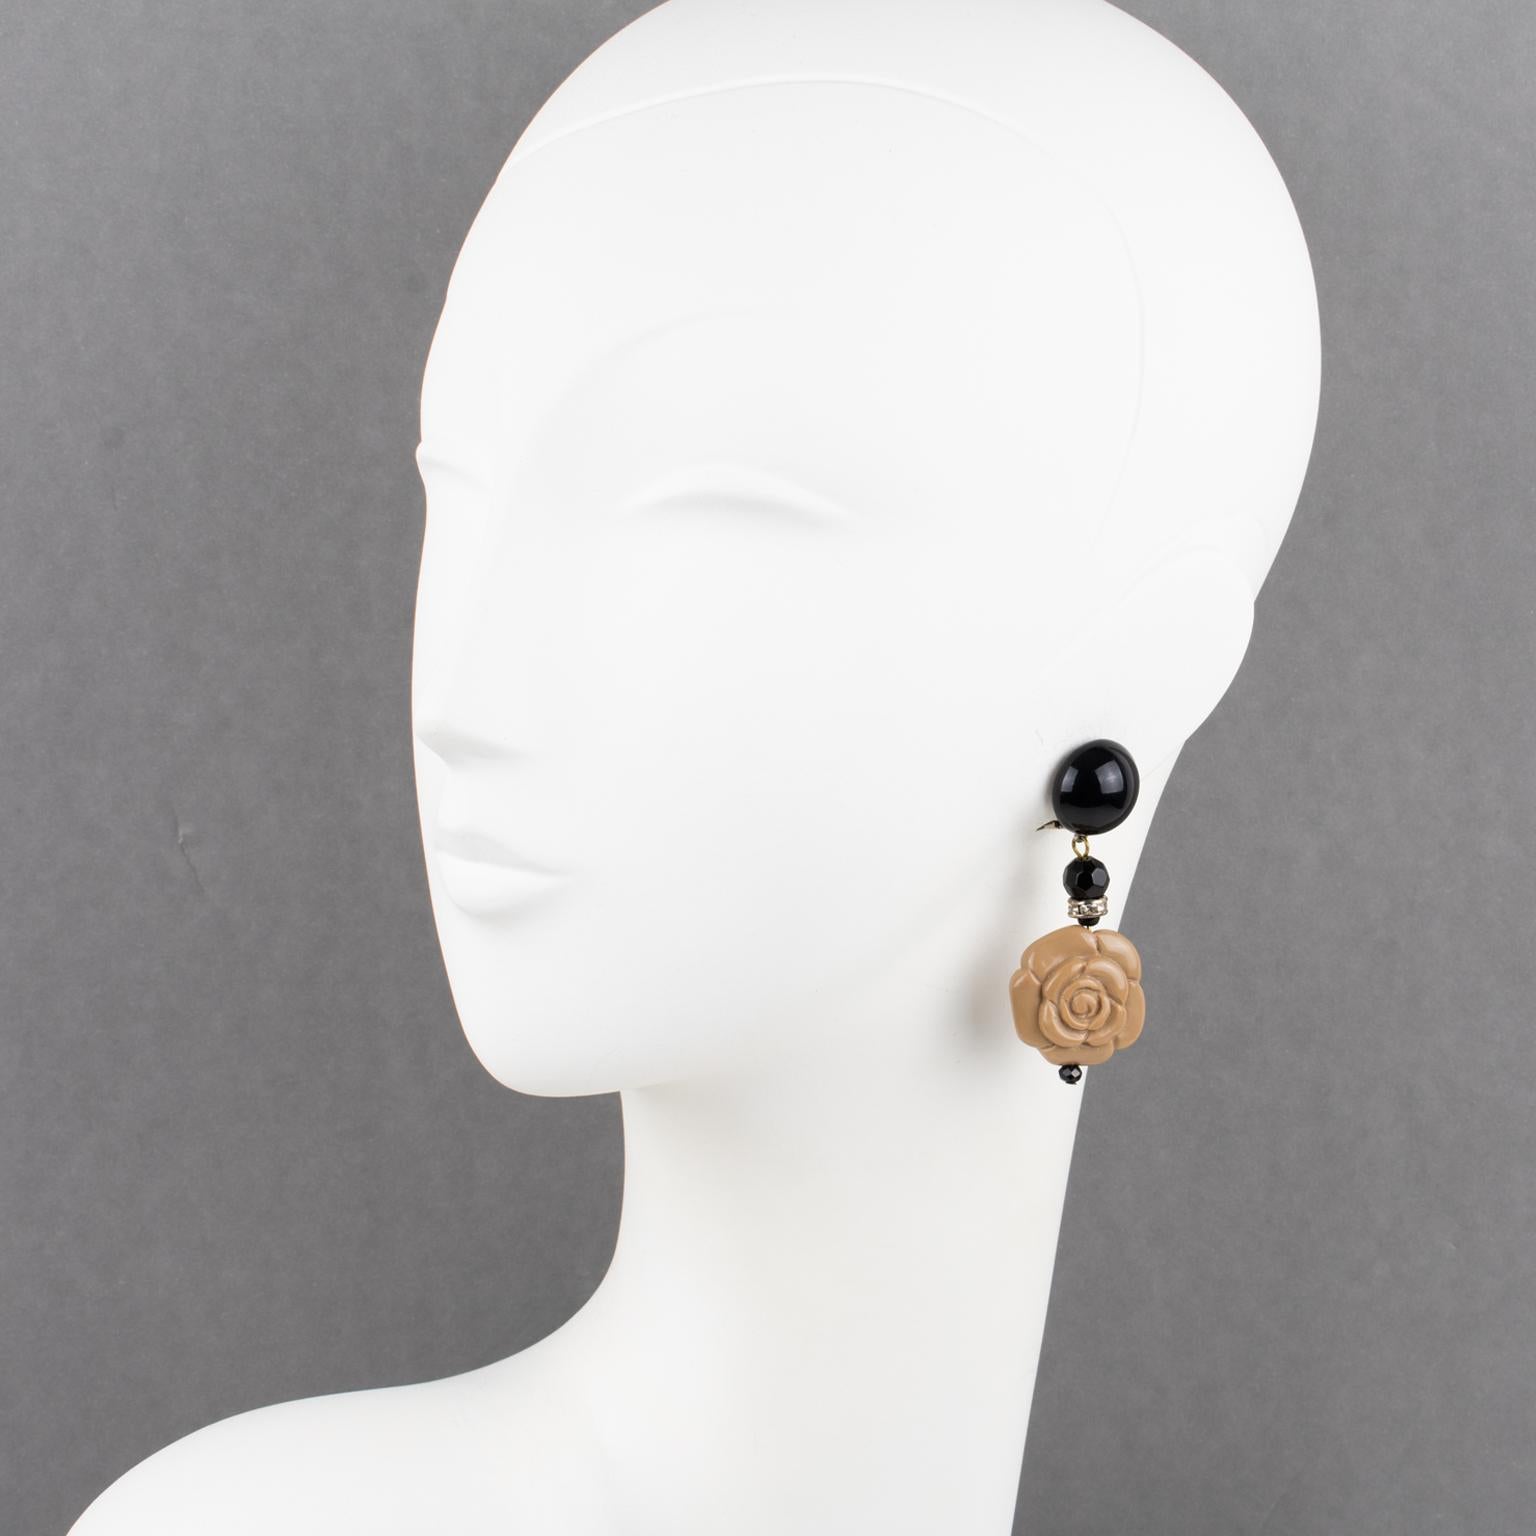 Charming resin clip-on earrings designed by Angela Caputi, made in Italy. Dangling shape with black color contrasted with a carved toffee beige resin floral element and complemented with tiny clear rhinestones spacer rings. 
As you know, Caputi